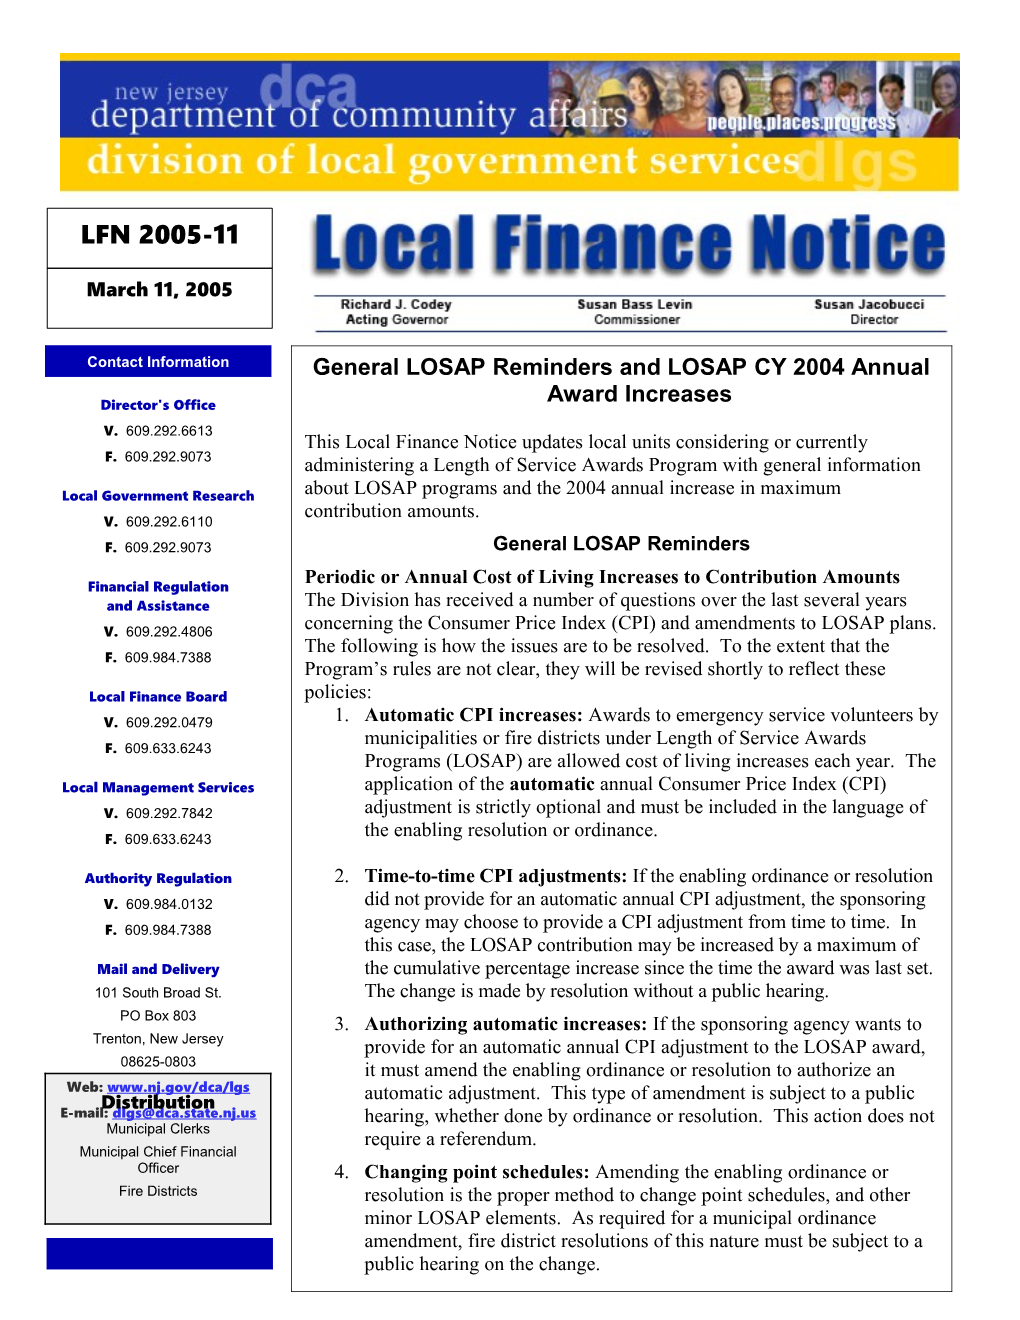 Local Finance Notice 2005-11March 11, 2005Page 1